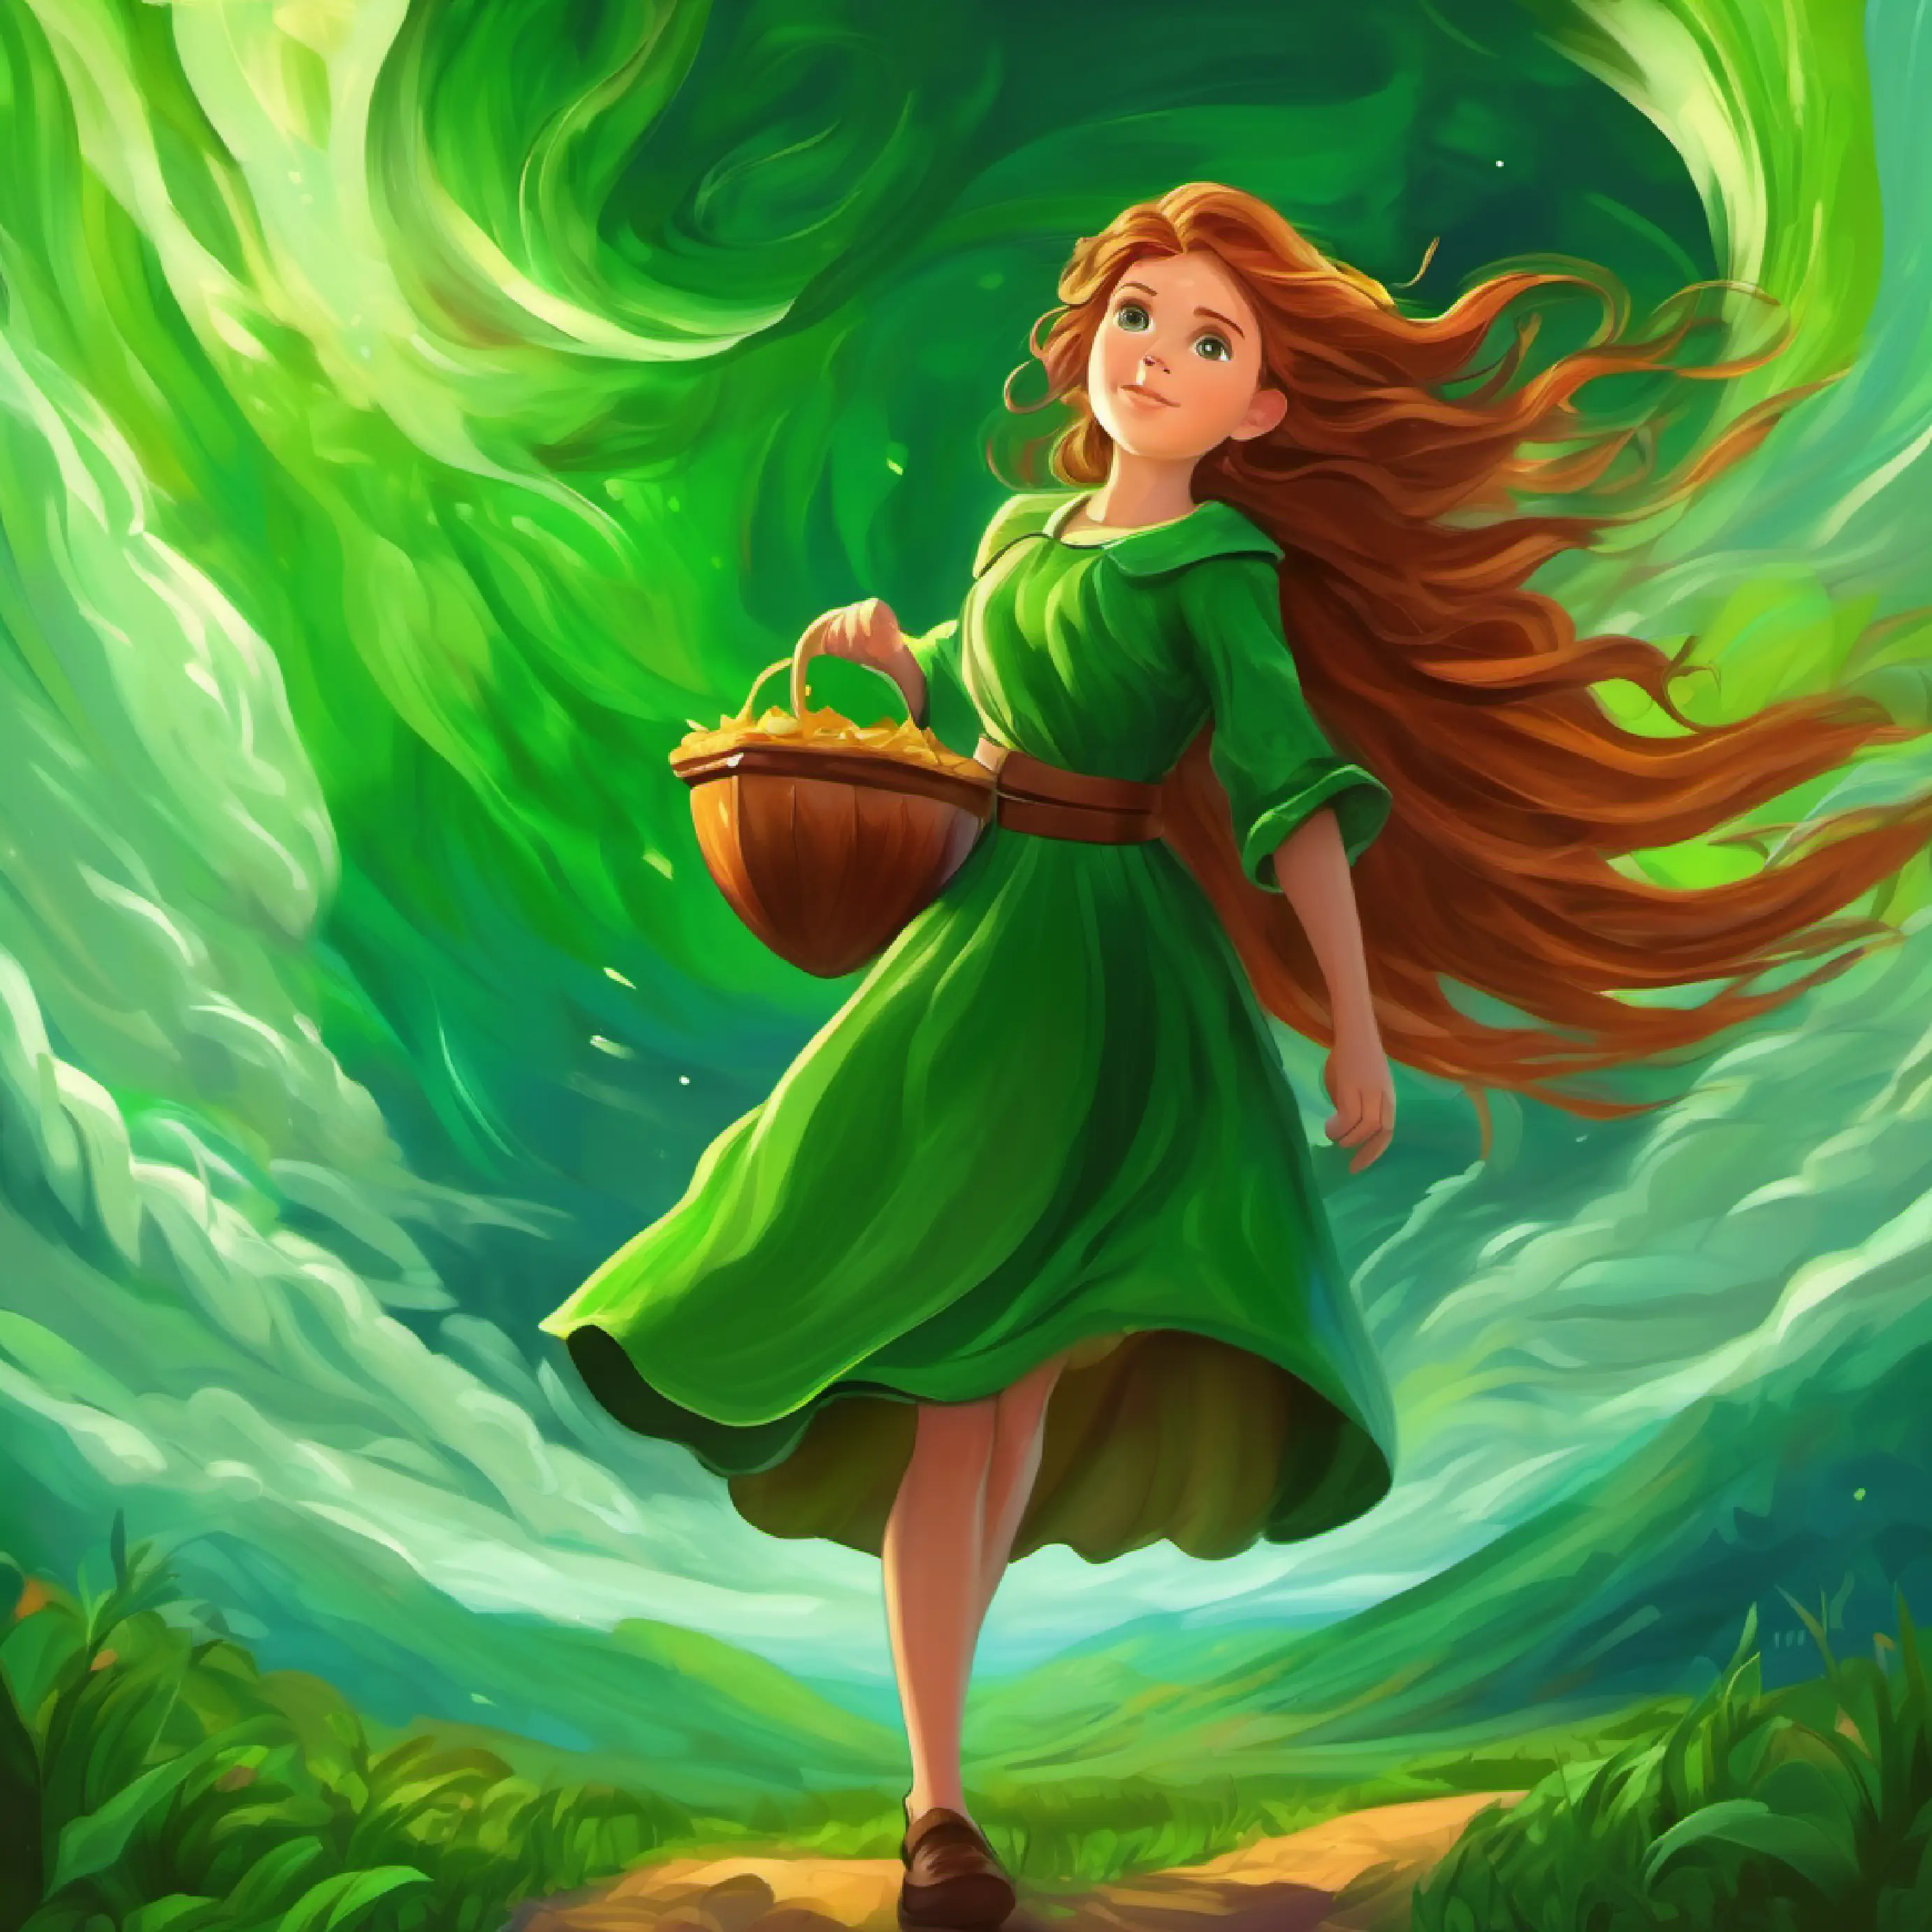 Brave young girl with flowing chestnut hair and bright green eyes protects the land from the greedy king with a great storm.